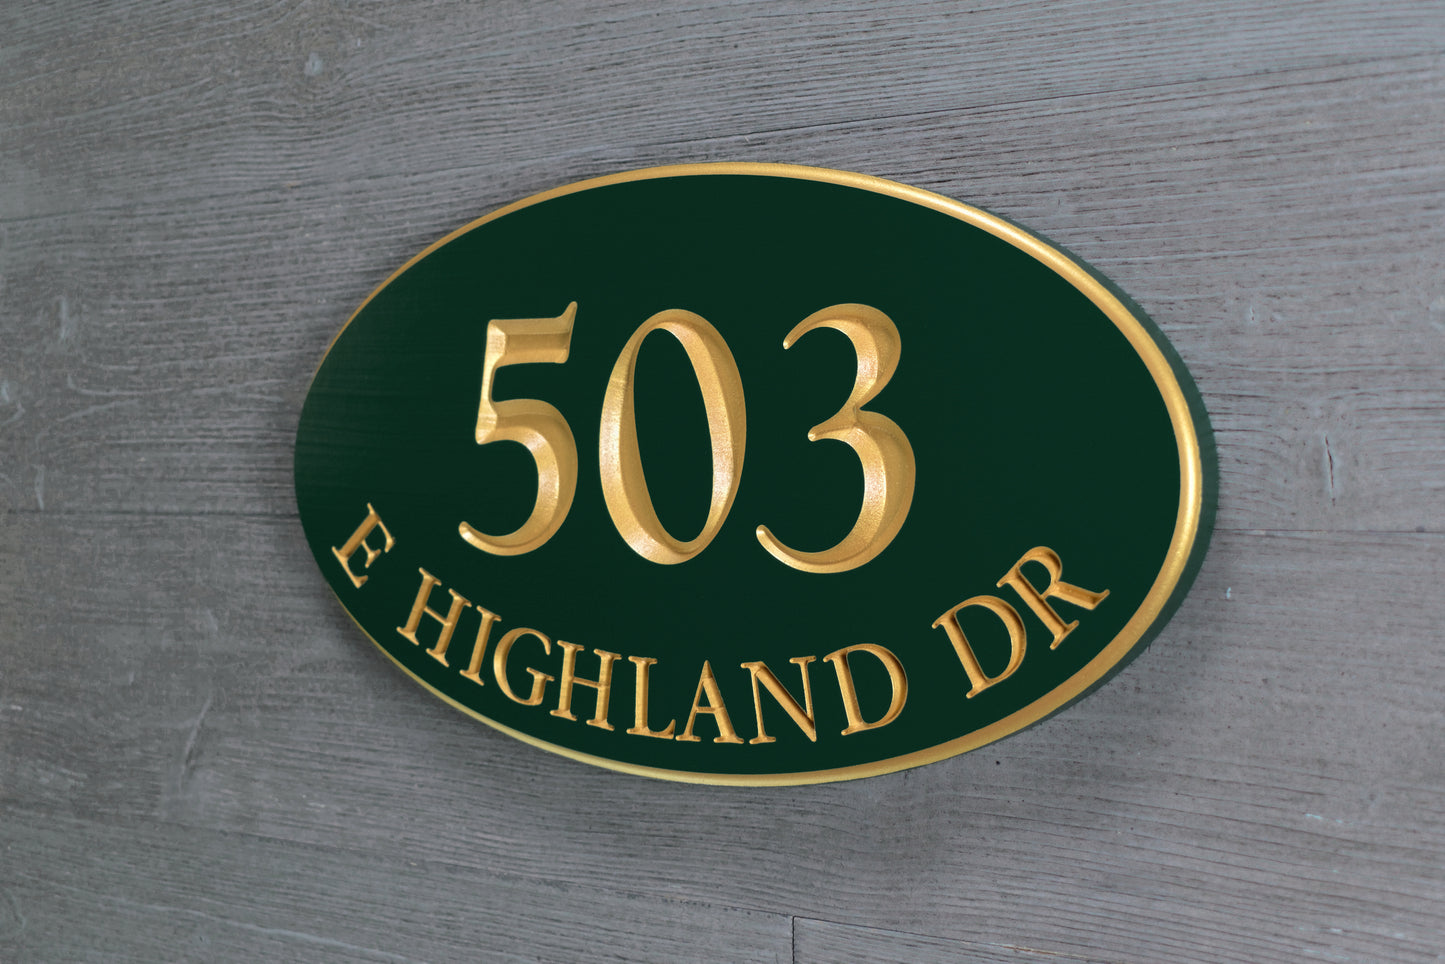 Oval Address Sign With Street